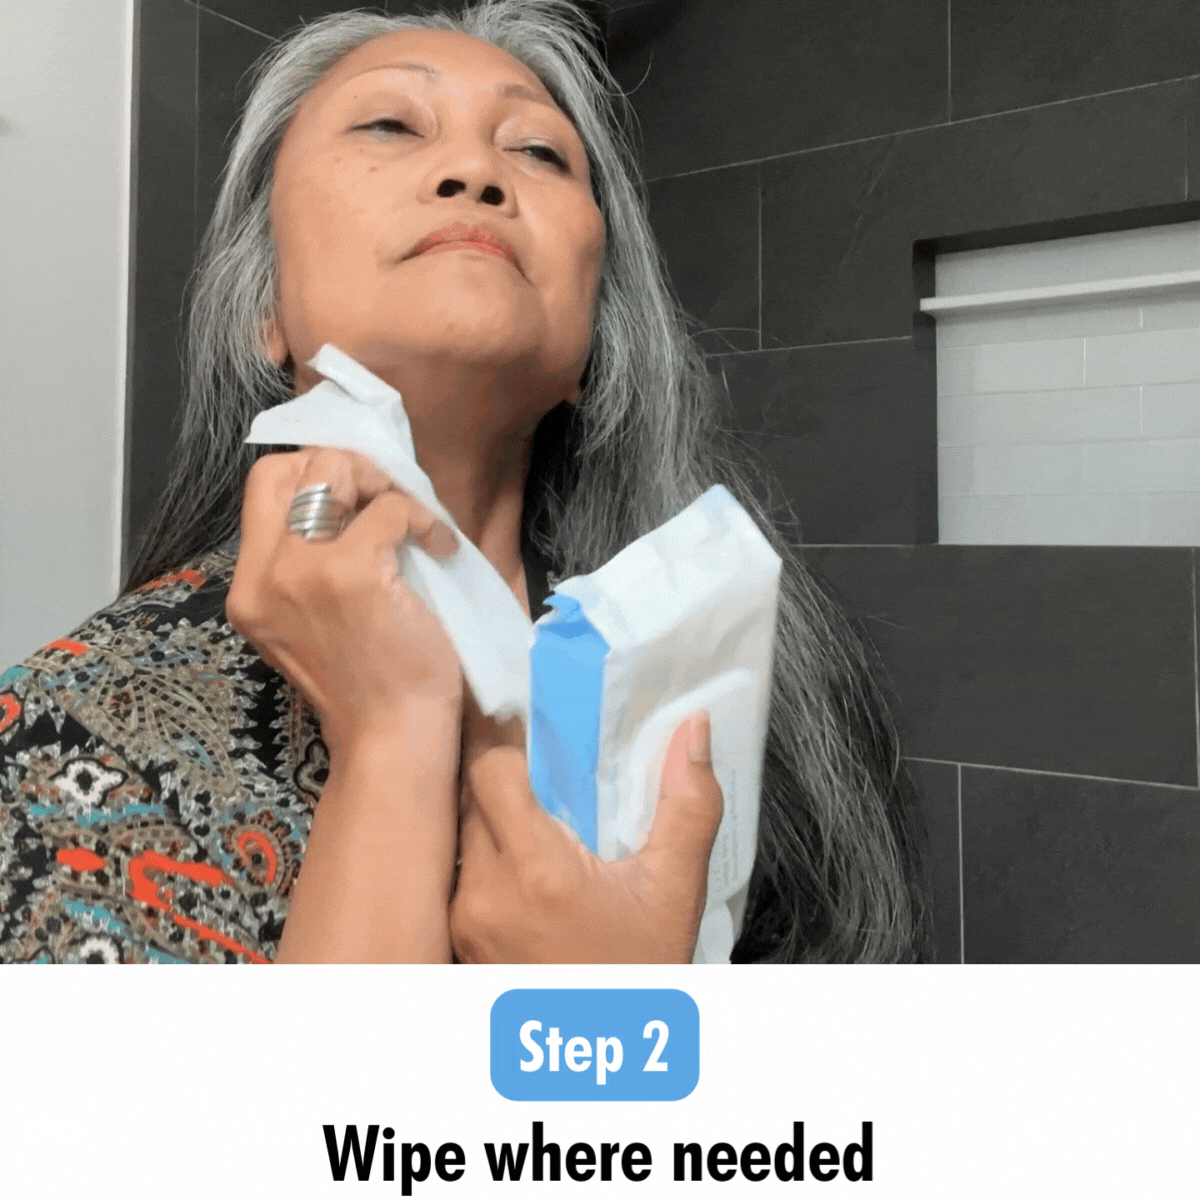 Step 2 of Mirai Clinical's usage guide: Precisely showing the key areas to apply the persimmon-infused deodorizing wipe for optimal body odor neutralization.